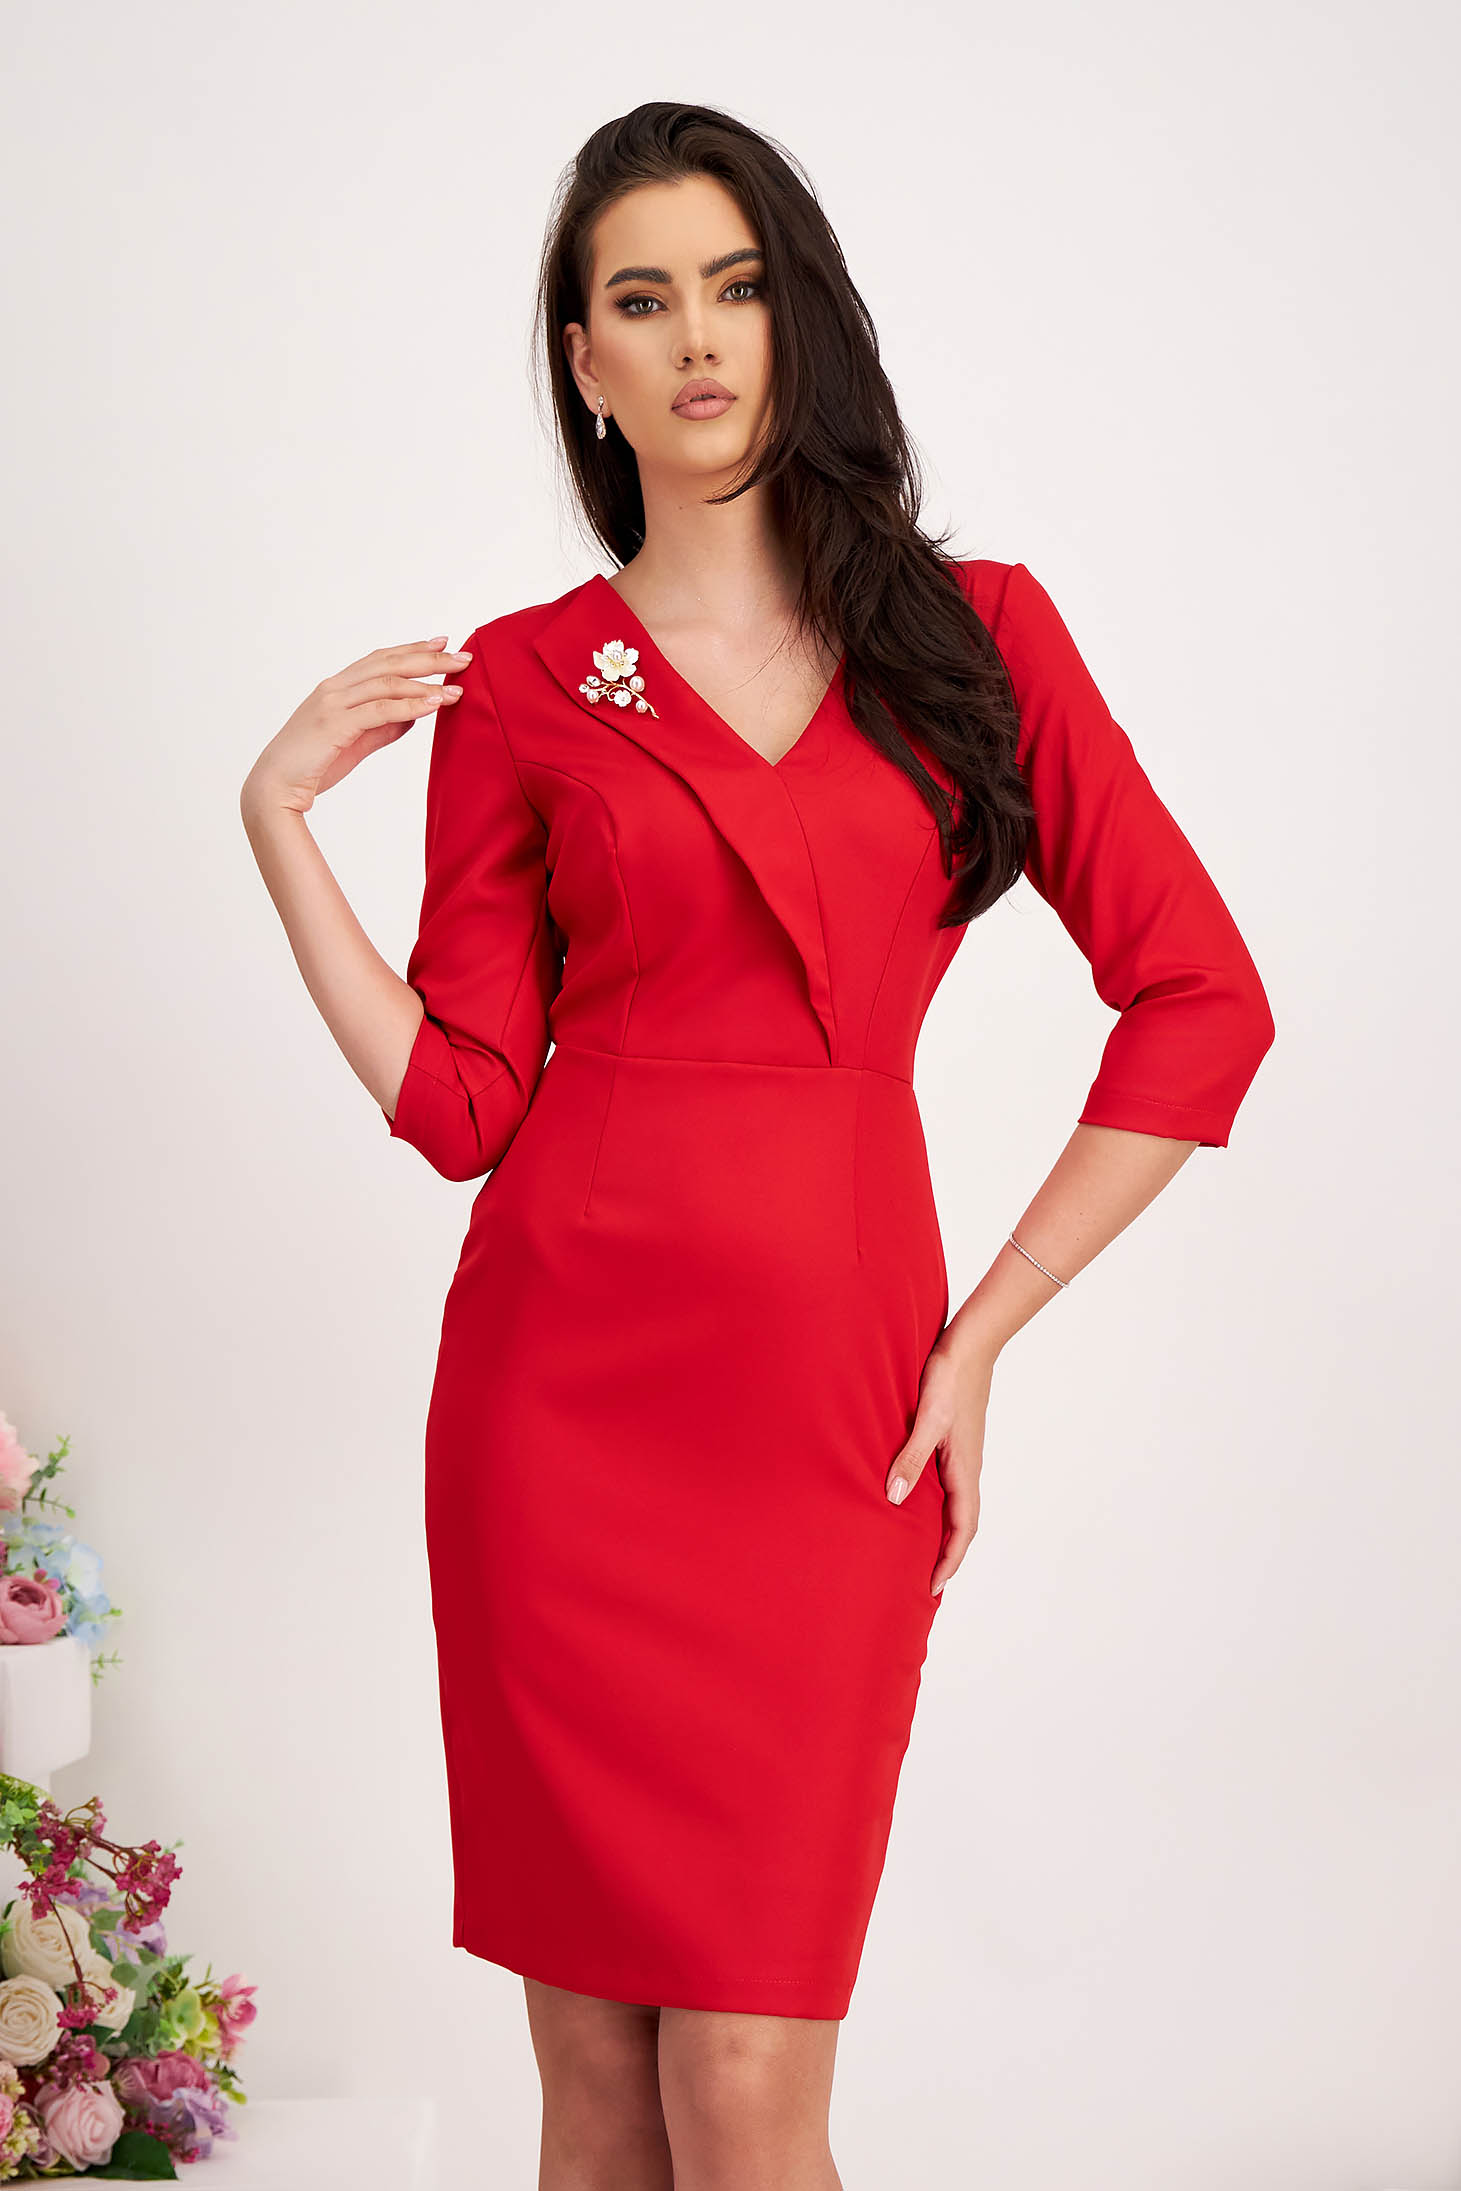 Red pencil type dress made of slightly elastic fabric accessorized with brooch - StarShinerS 1 - StarShinerS.com